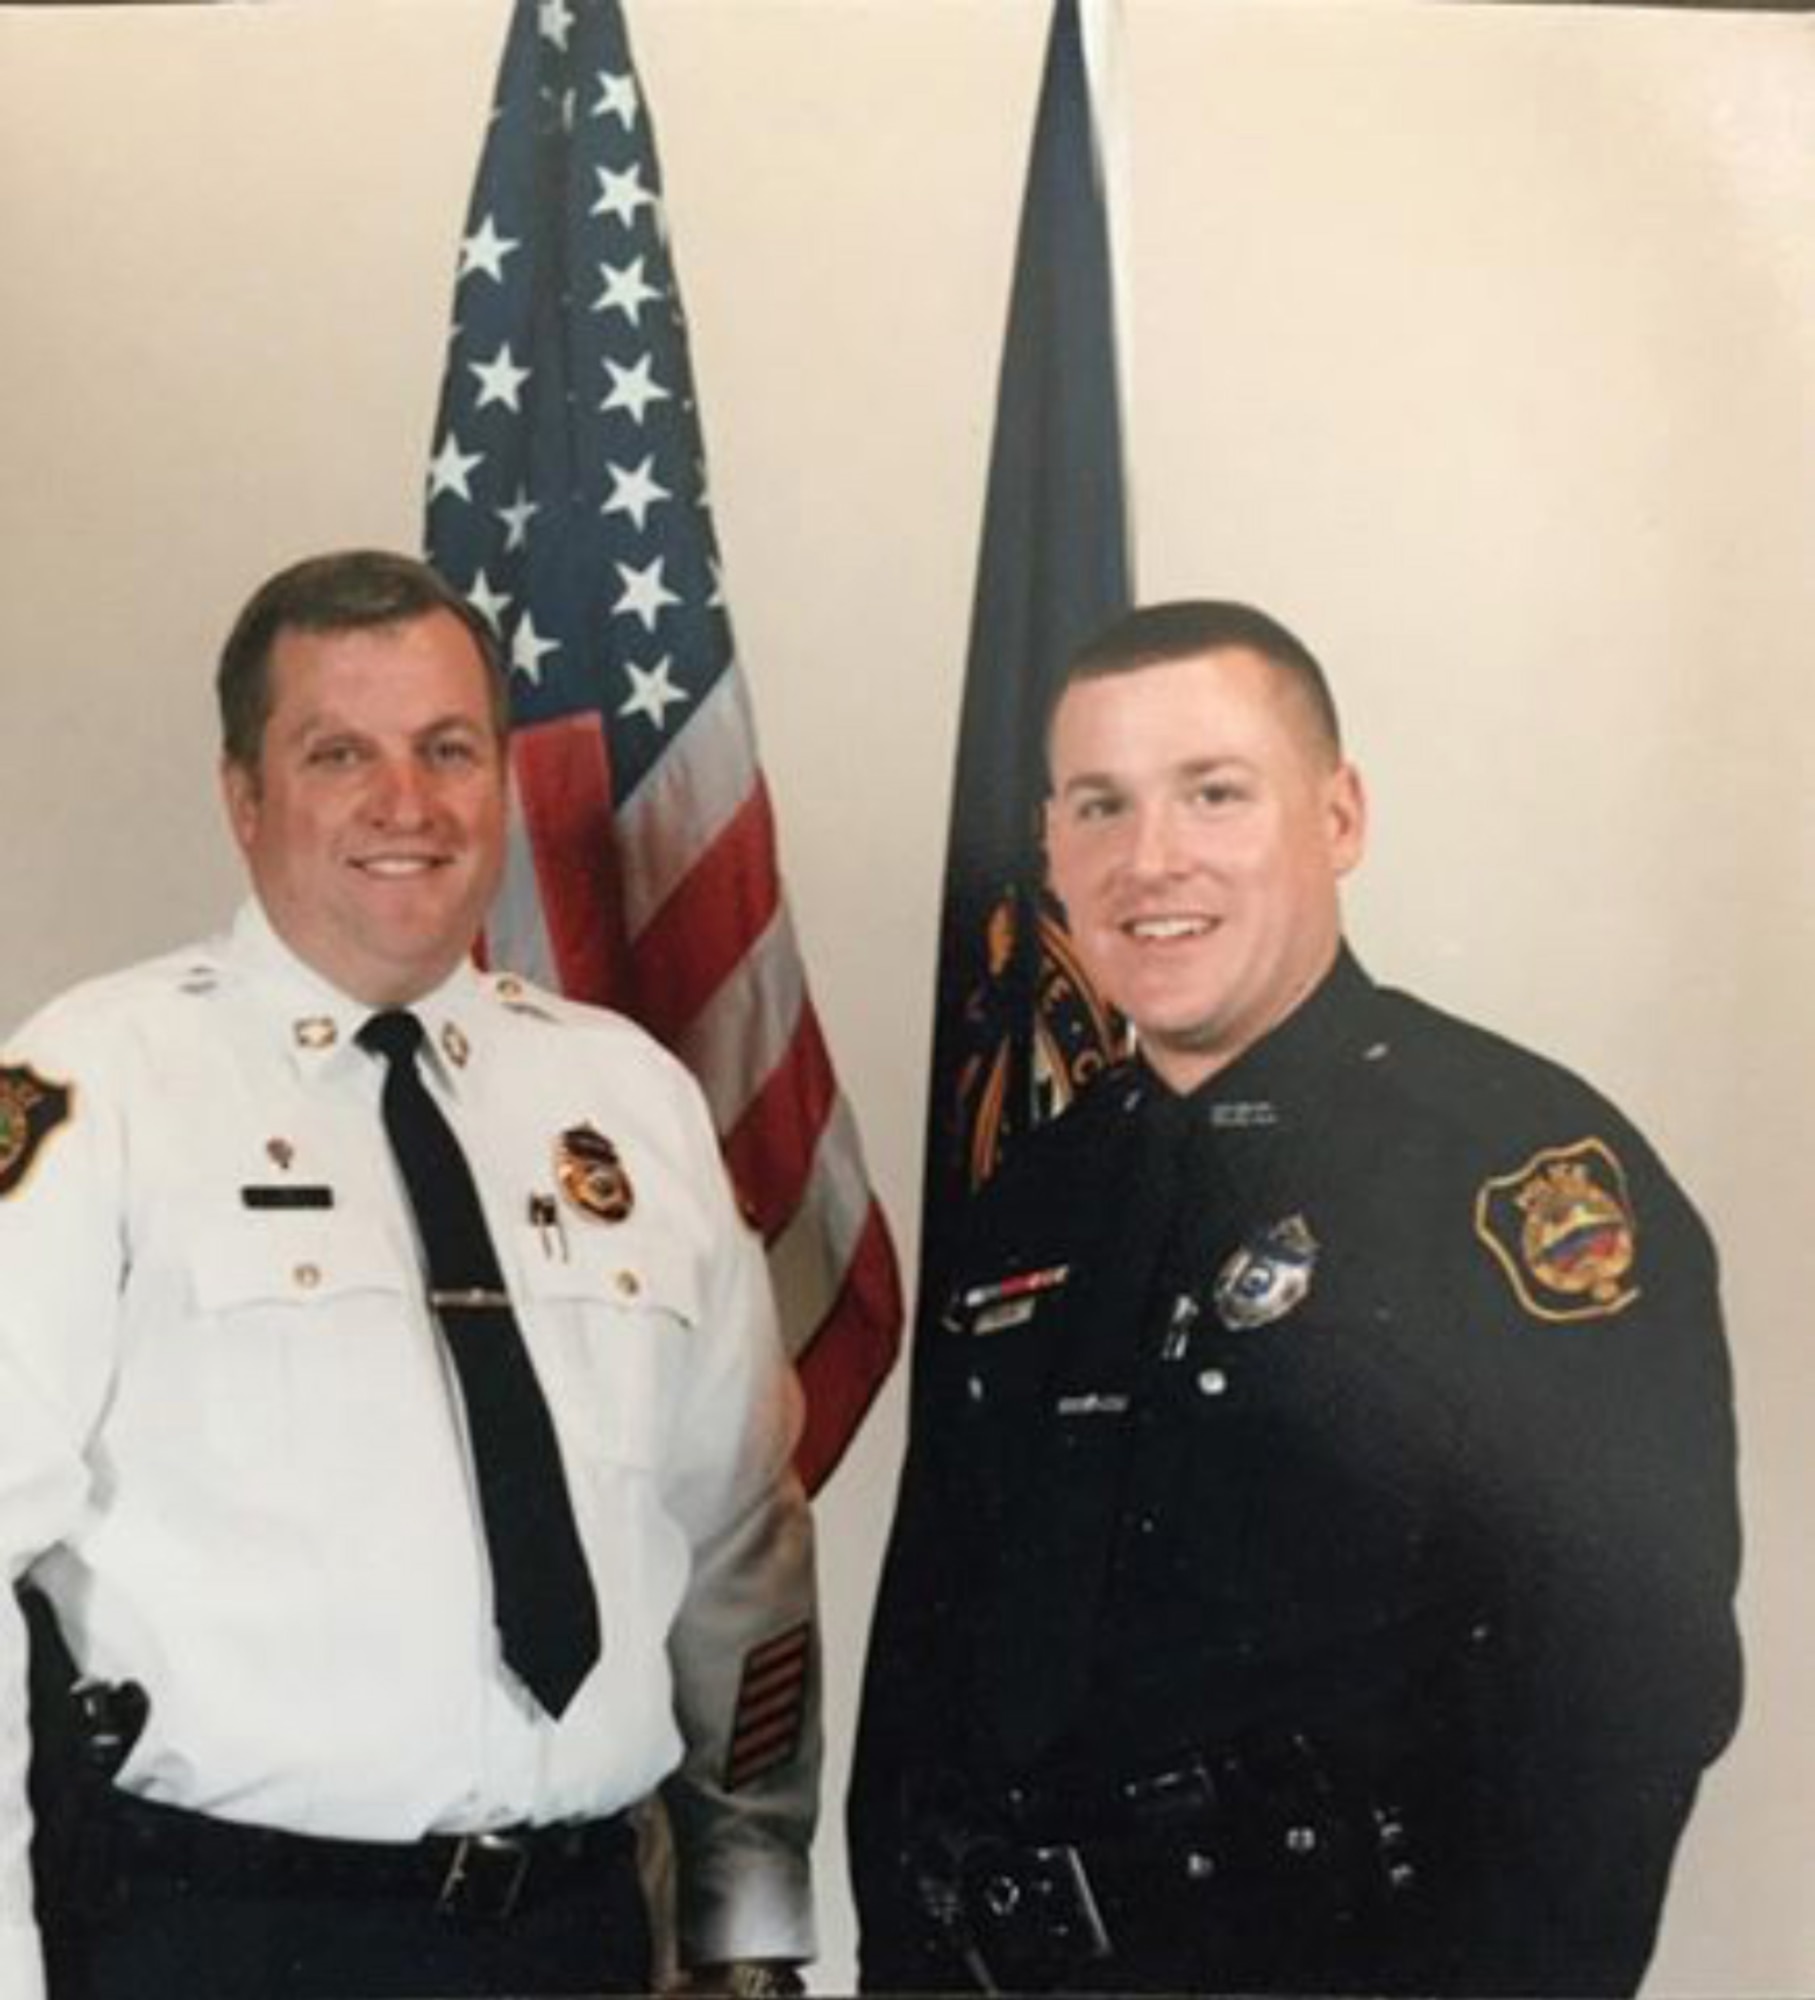 Gilman worked as a police officer for 17 years before going into mortgage lending and real estate.